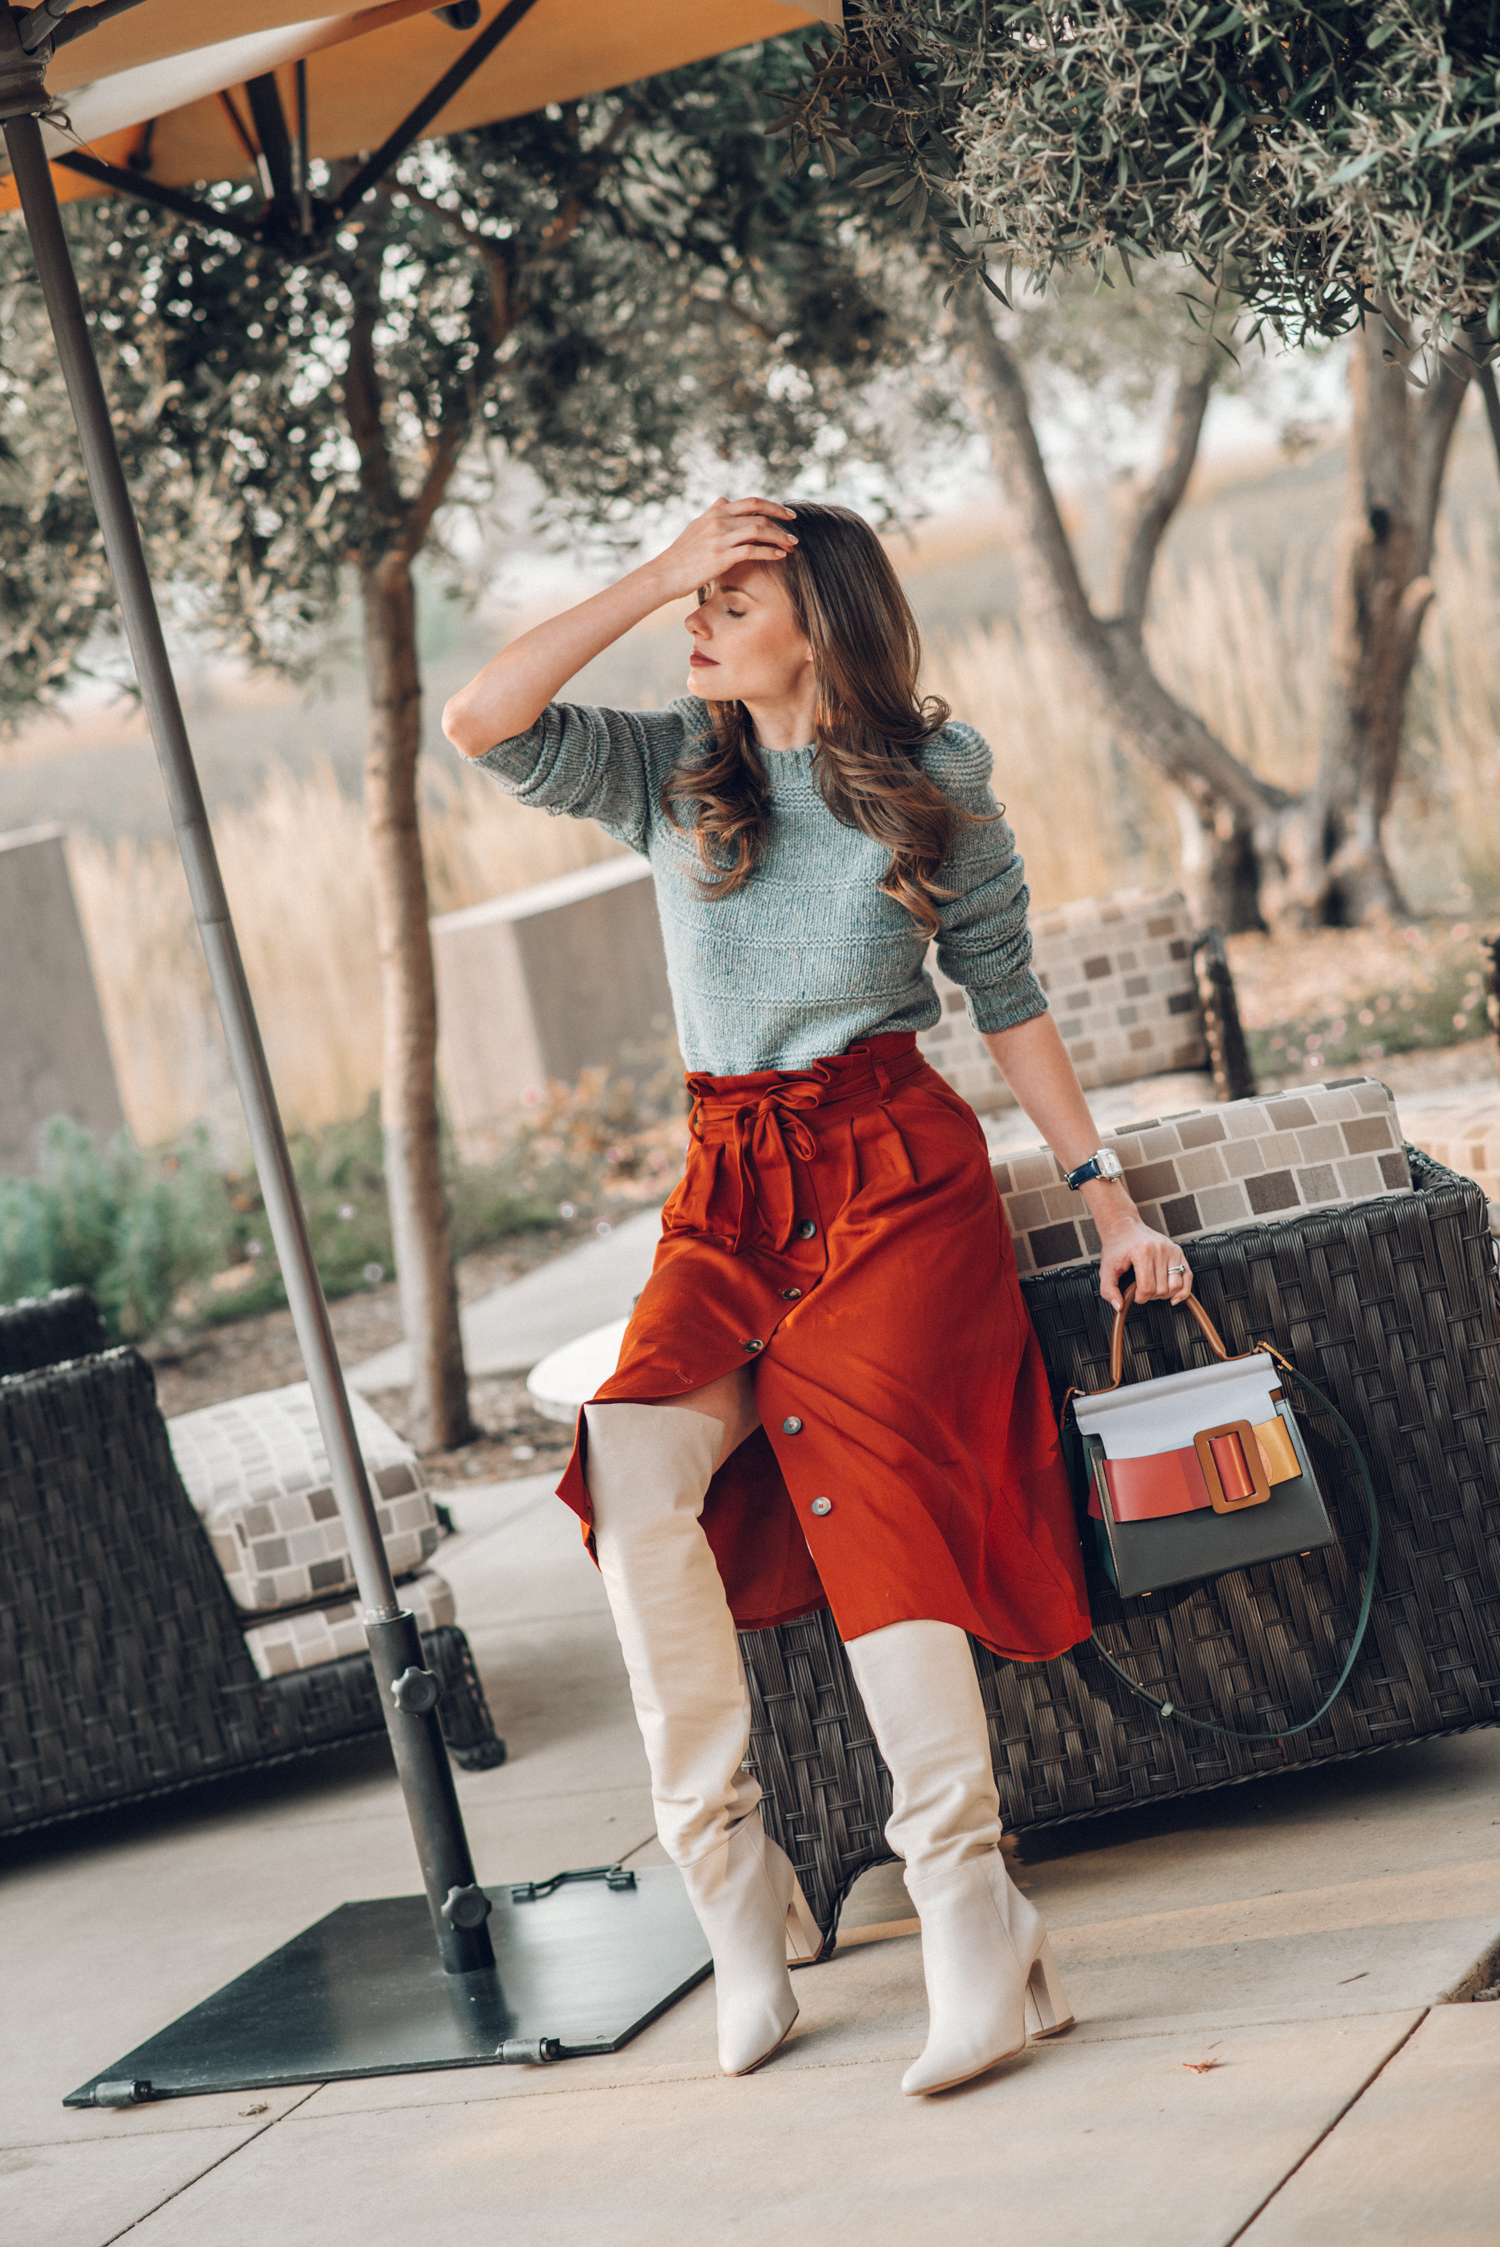 Alyssa Campanella of The A List blog visits B Cellars for Cabernet season 2018 wearing Sezane Zia skirt, What For ivory boots, and Boyy Boutique karl bag